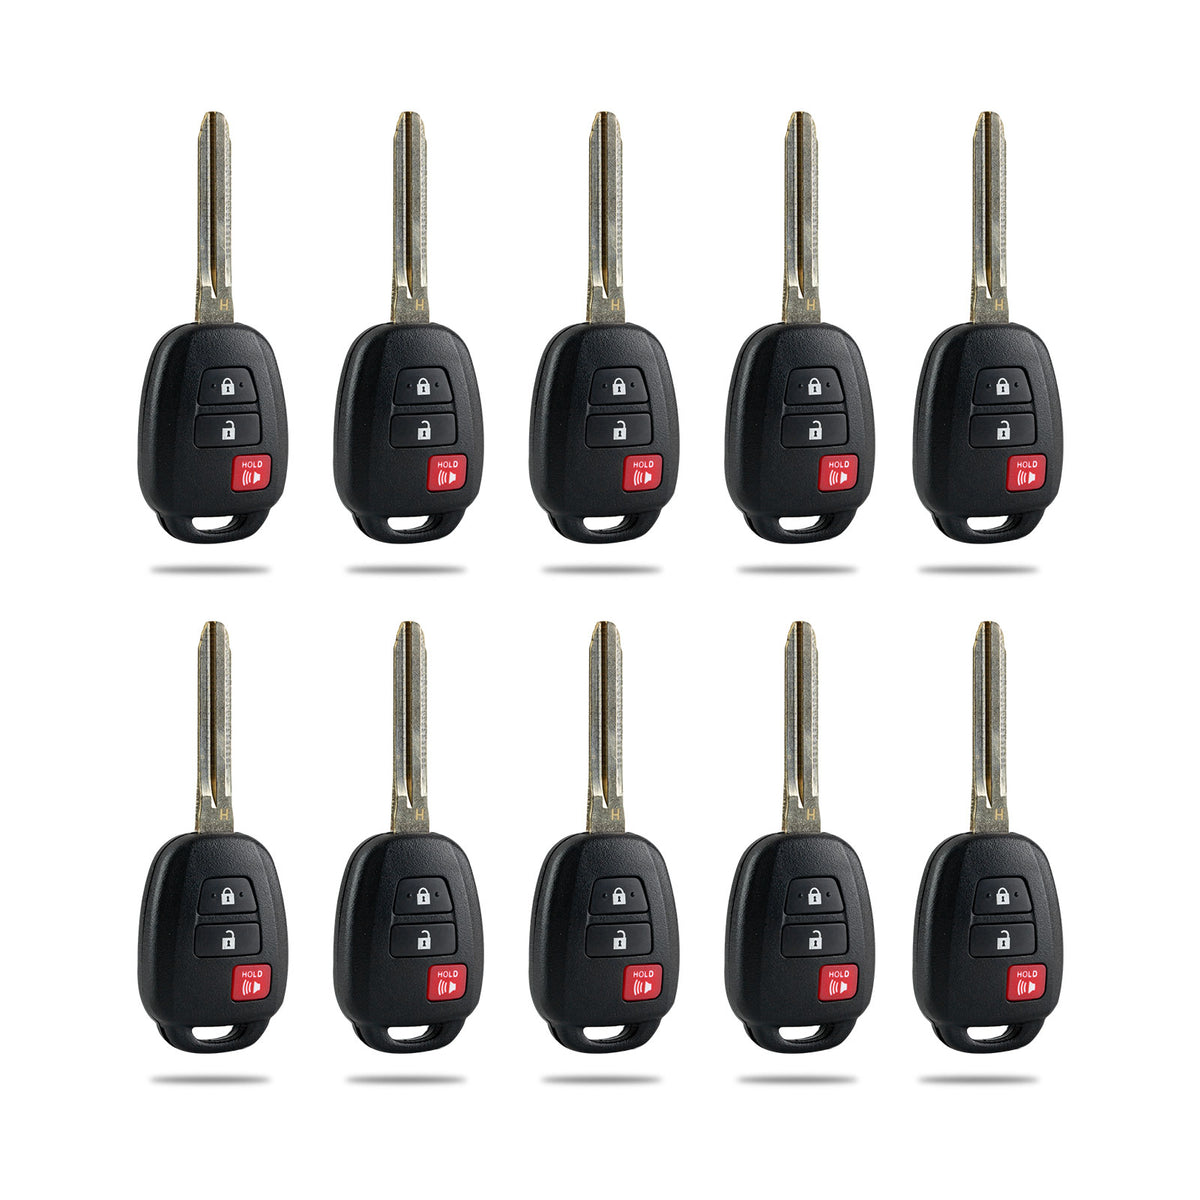 Lots of 10 Remote Car Key Fob Replacement for Toyota GQ4-52T 89070-0R120 fits 2013 2014 2015 2016 2017 2018 RAV4 H Chip